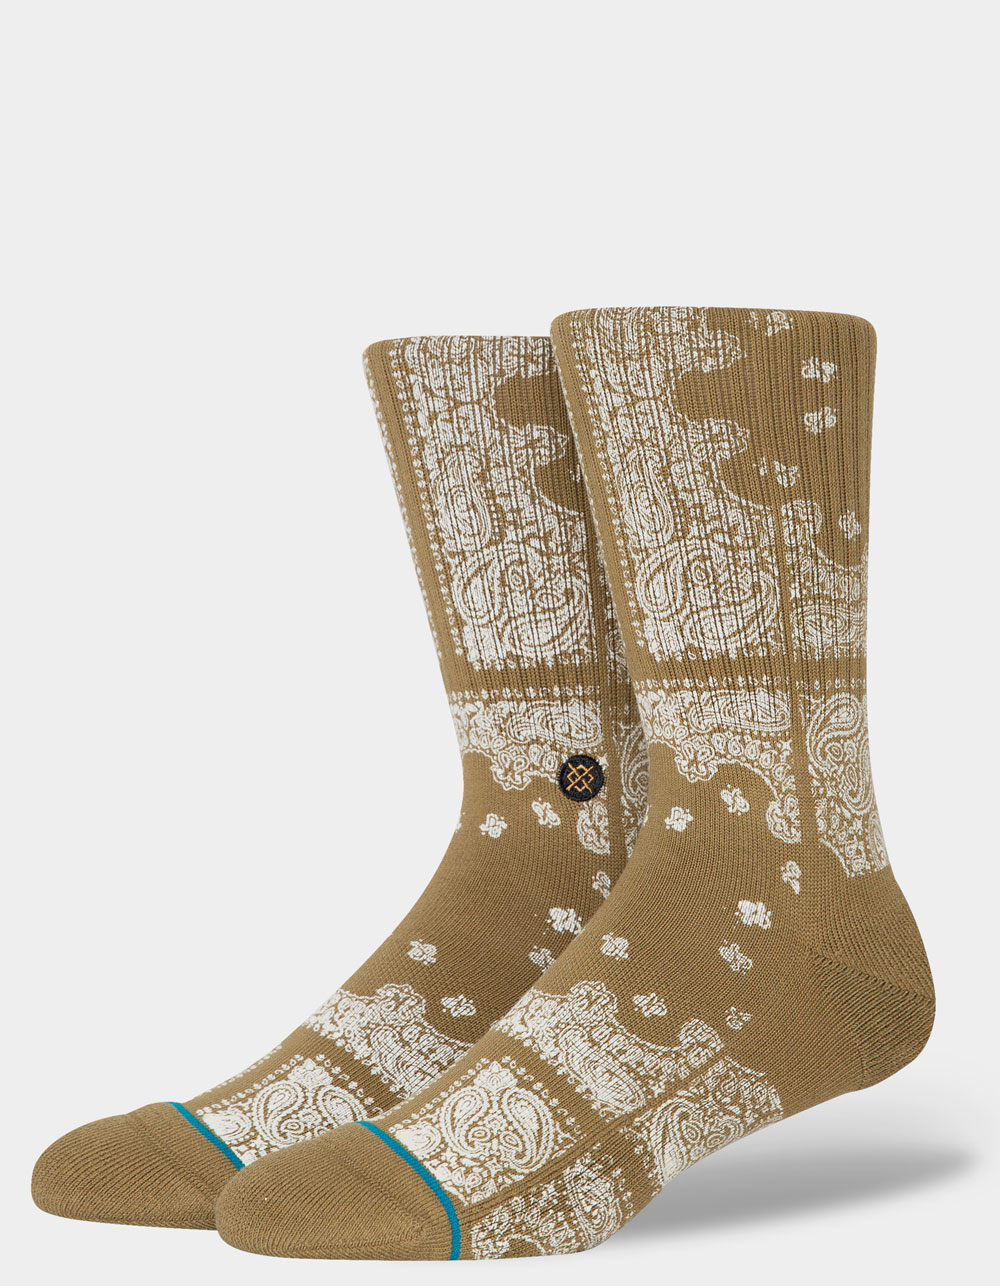 STANCE Lonesome Town Mens Crew Socks